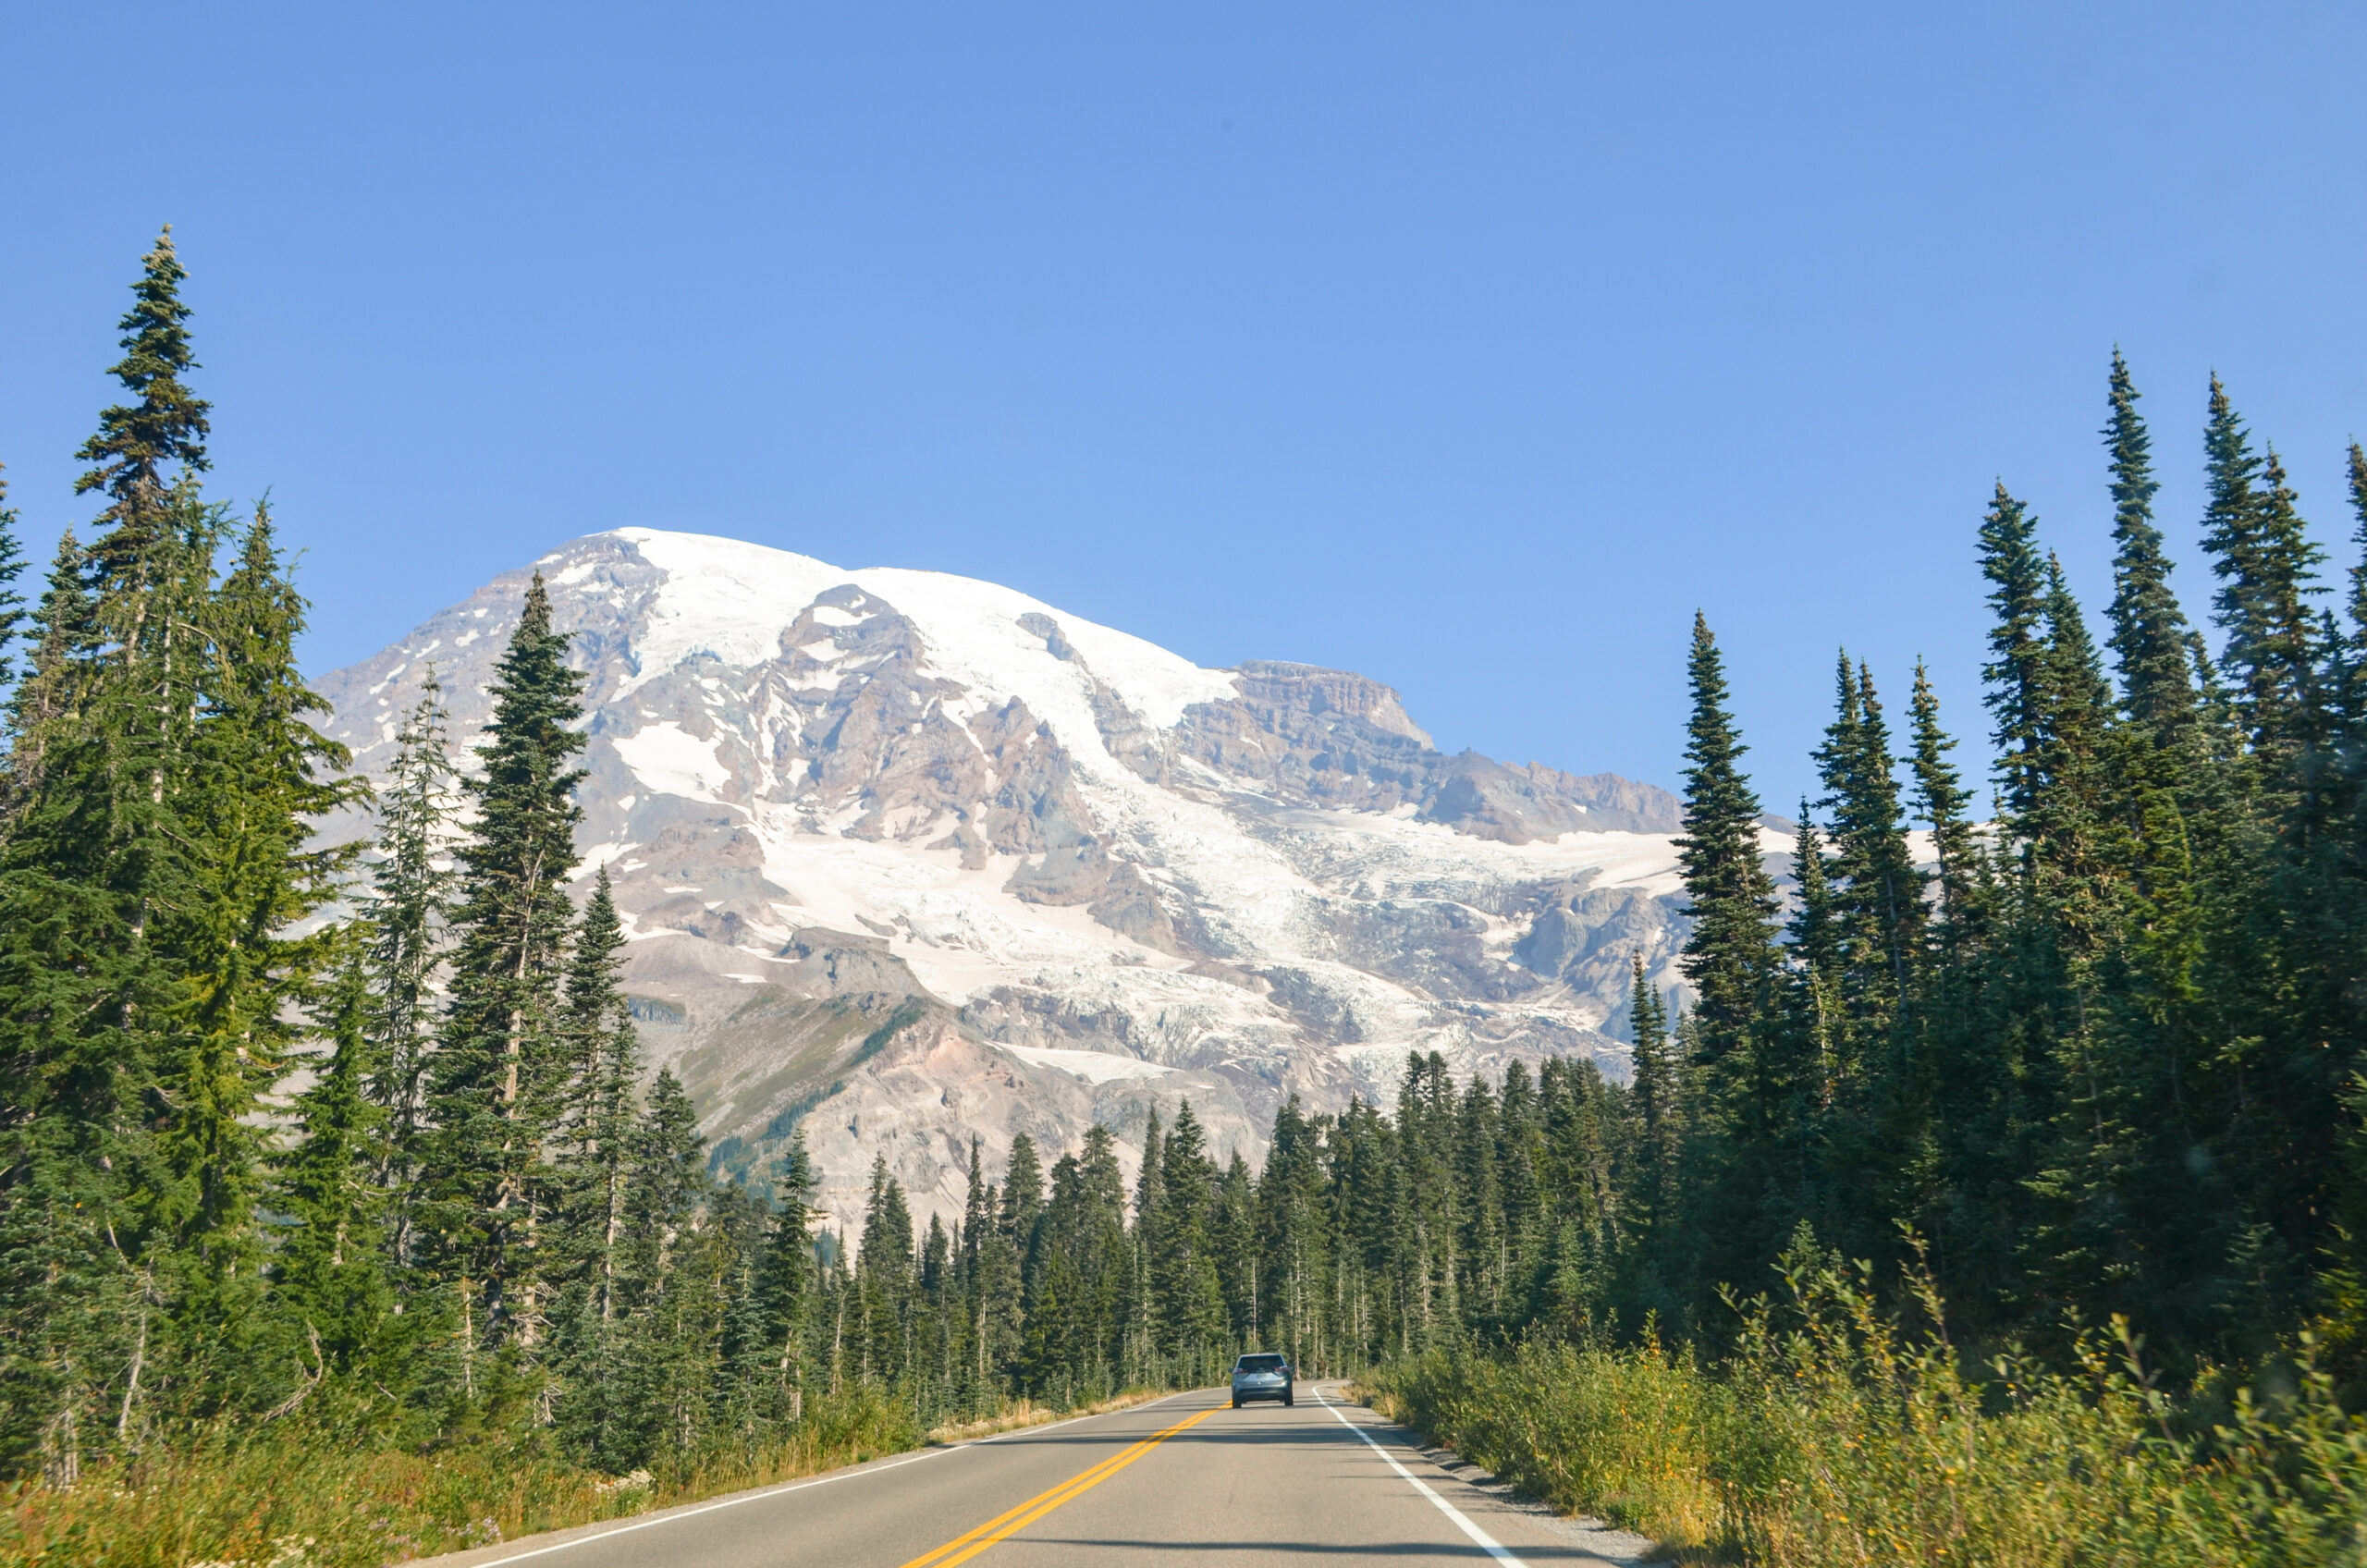 Pacific Northwest – Day Trips from Seattle